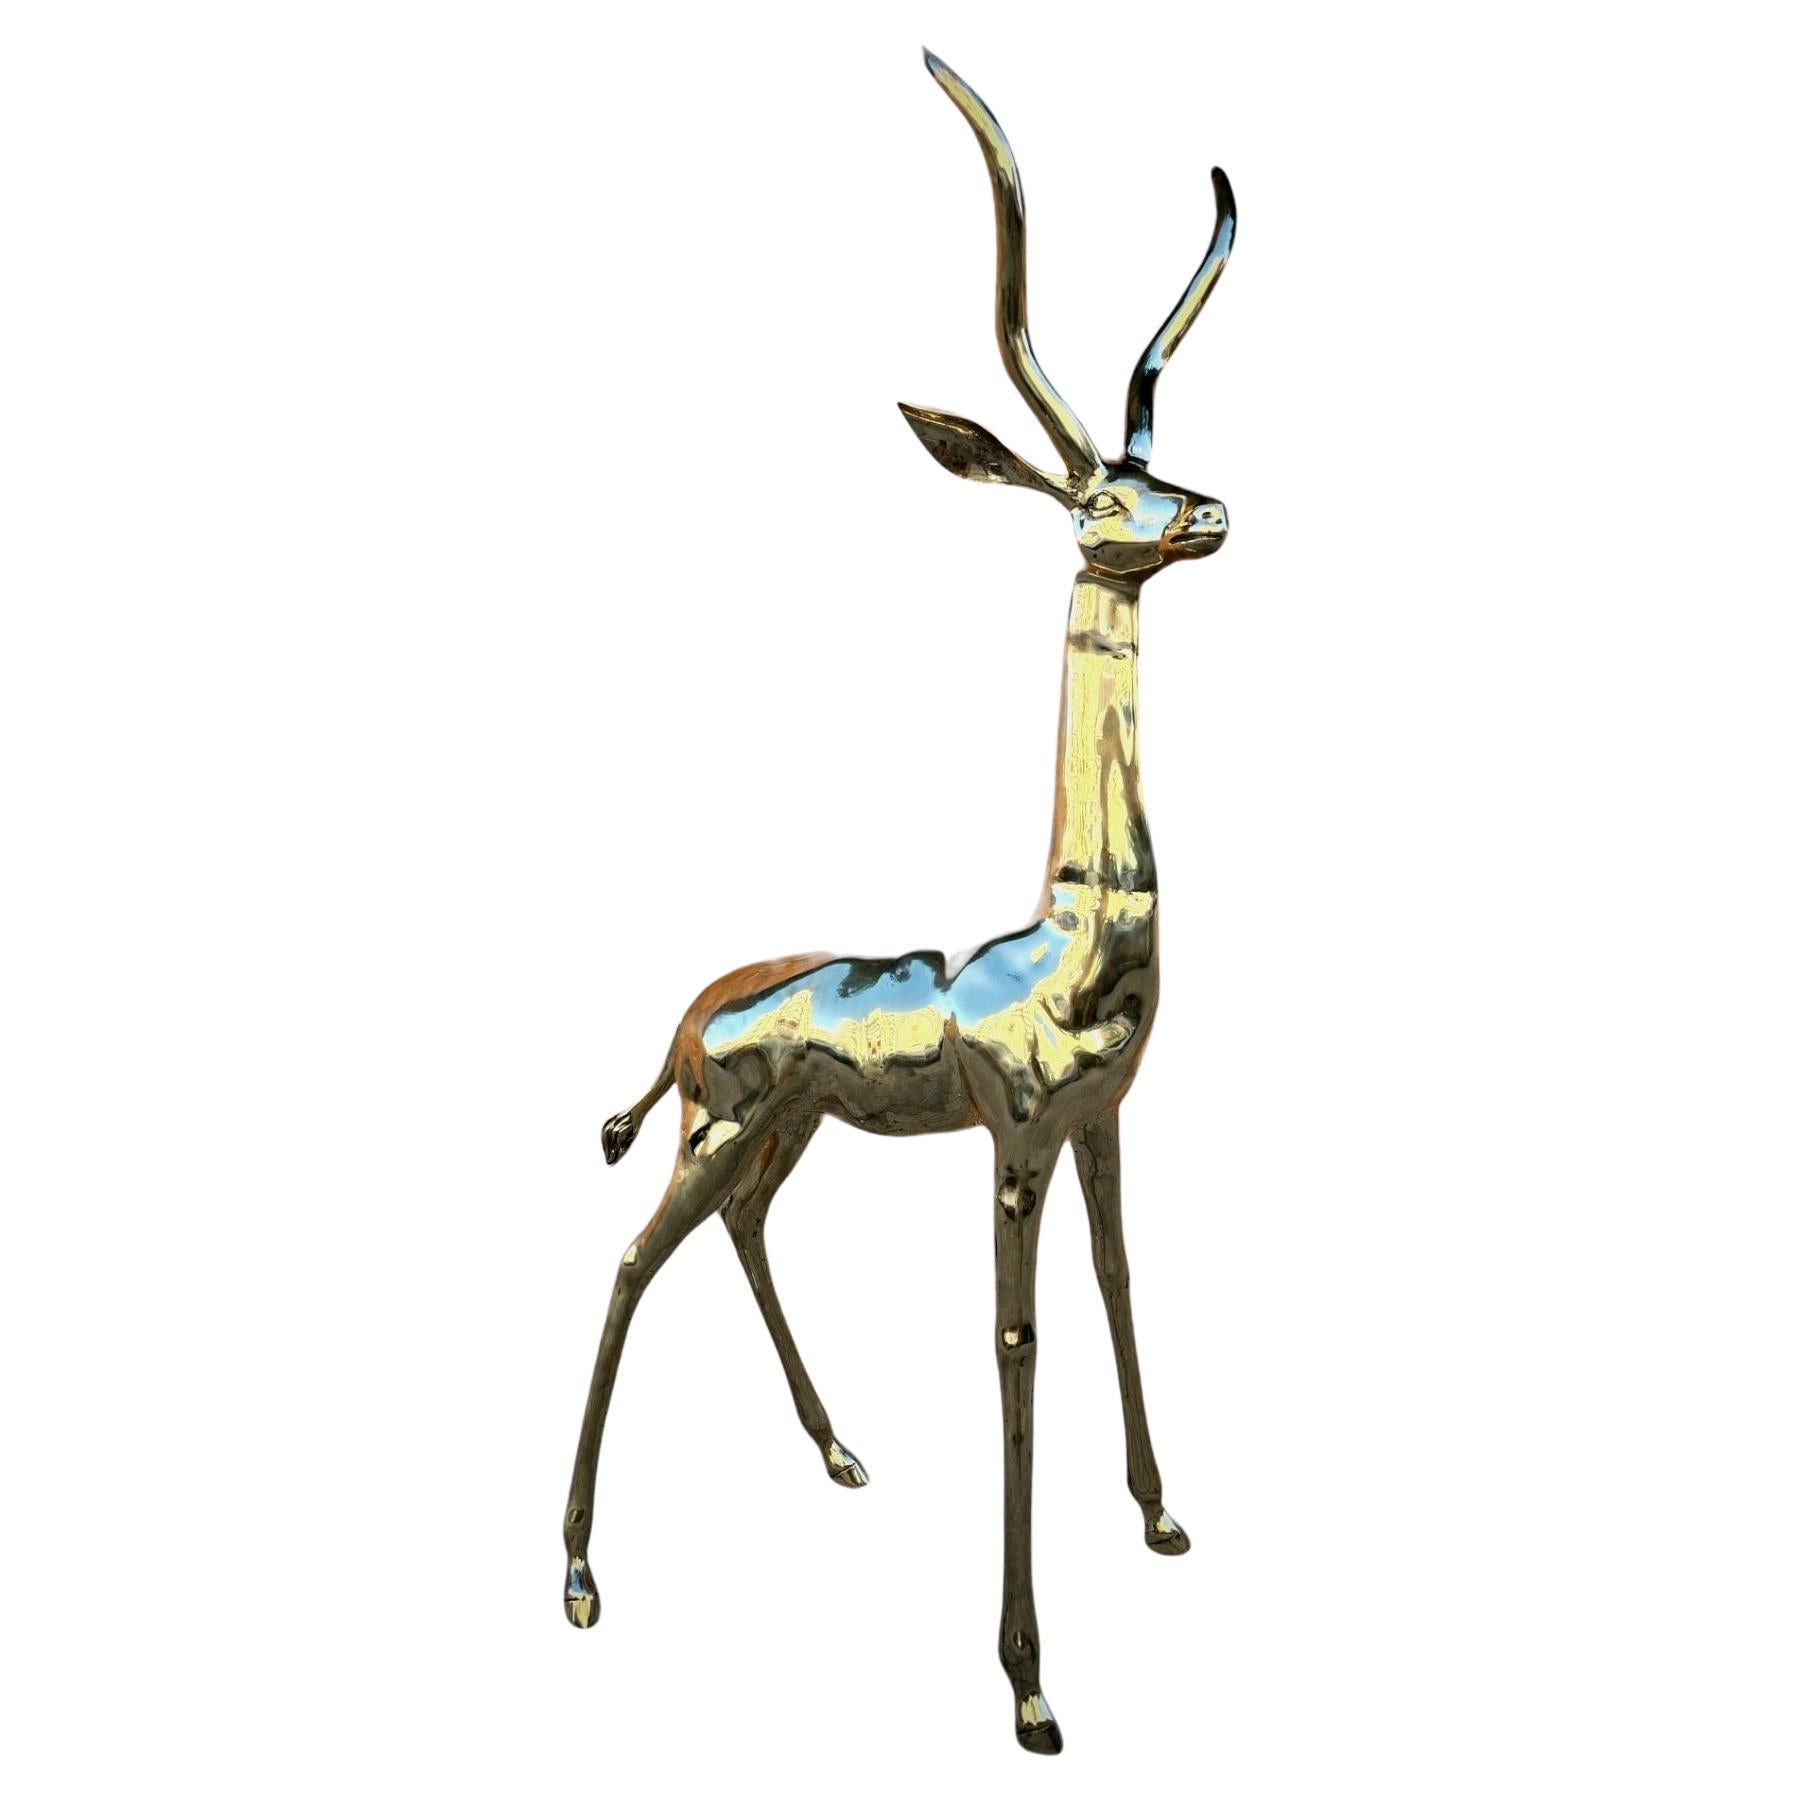 Exquisite Polished Bronze Sculpture: Lifesize Antelope from the 1950s For Sale